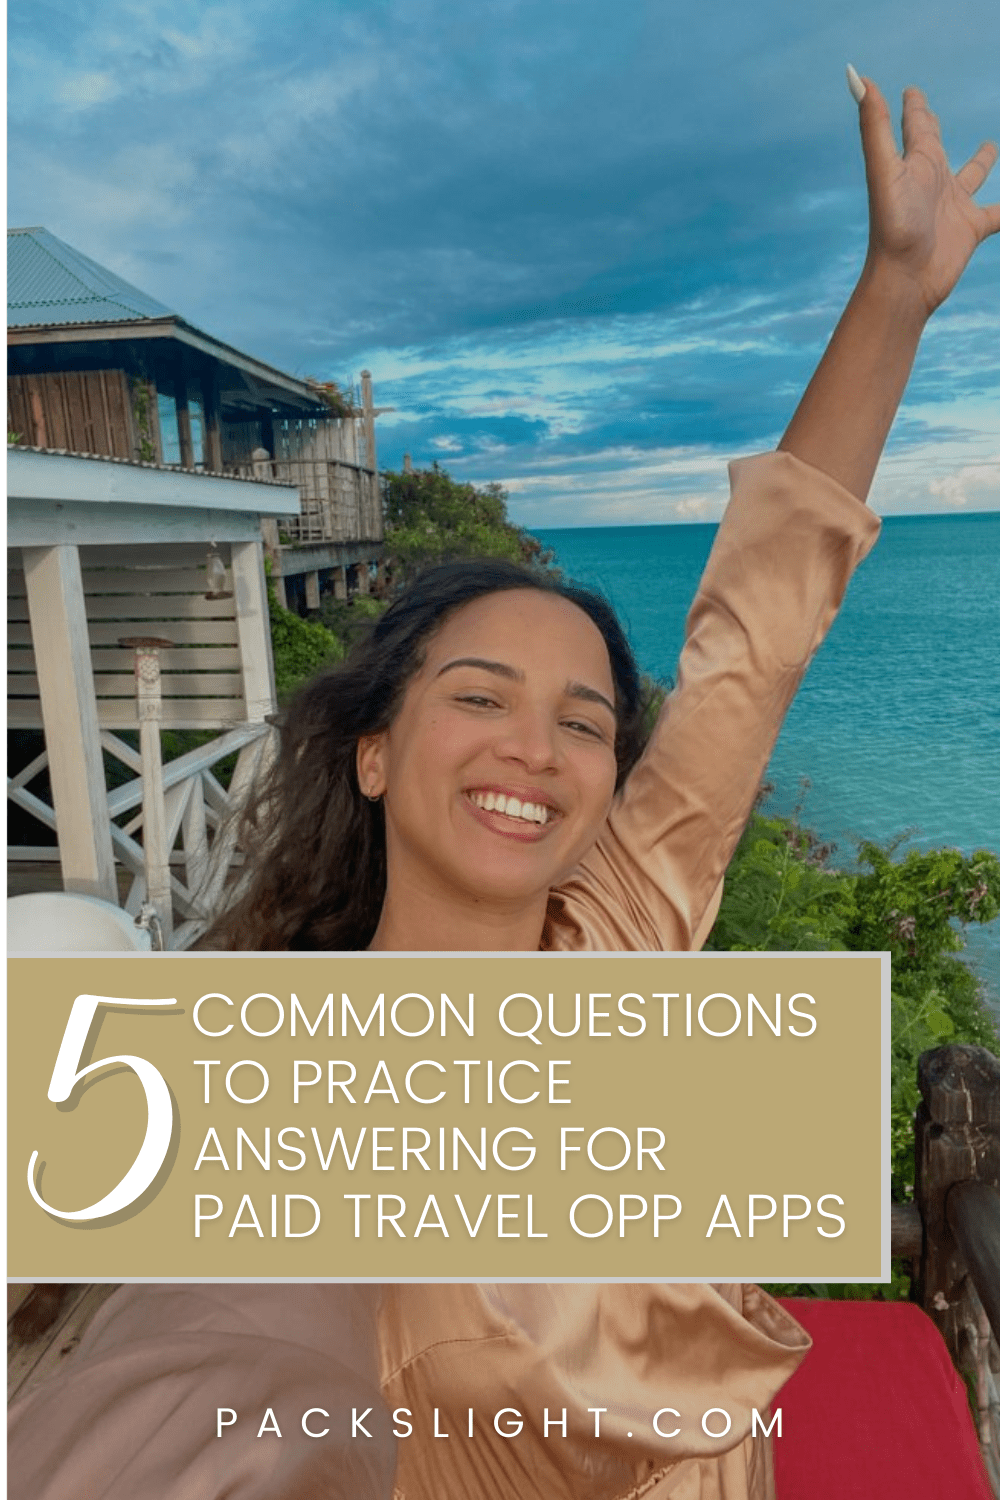 Pinterest Pin of an image of Gabby Beckford posing in front of a beach house with the title"5 Common Questions to Practice Answering for Paid Travel Opp Apps". 